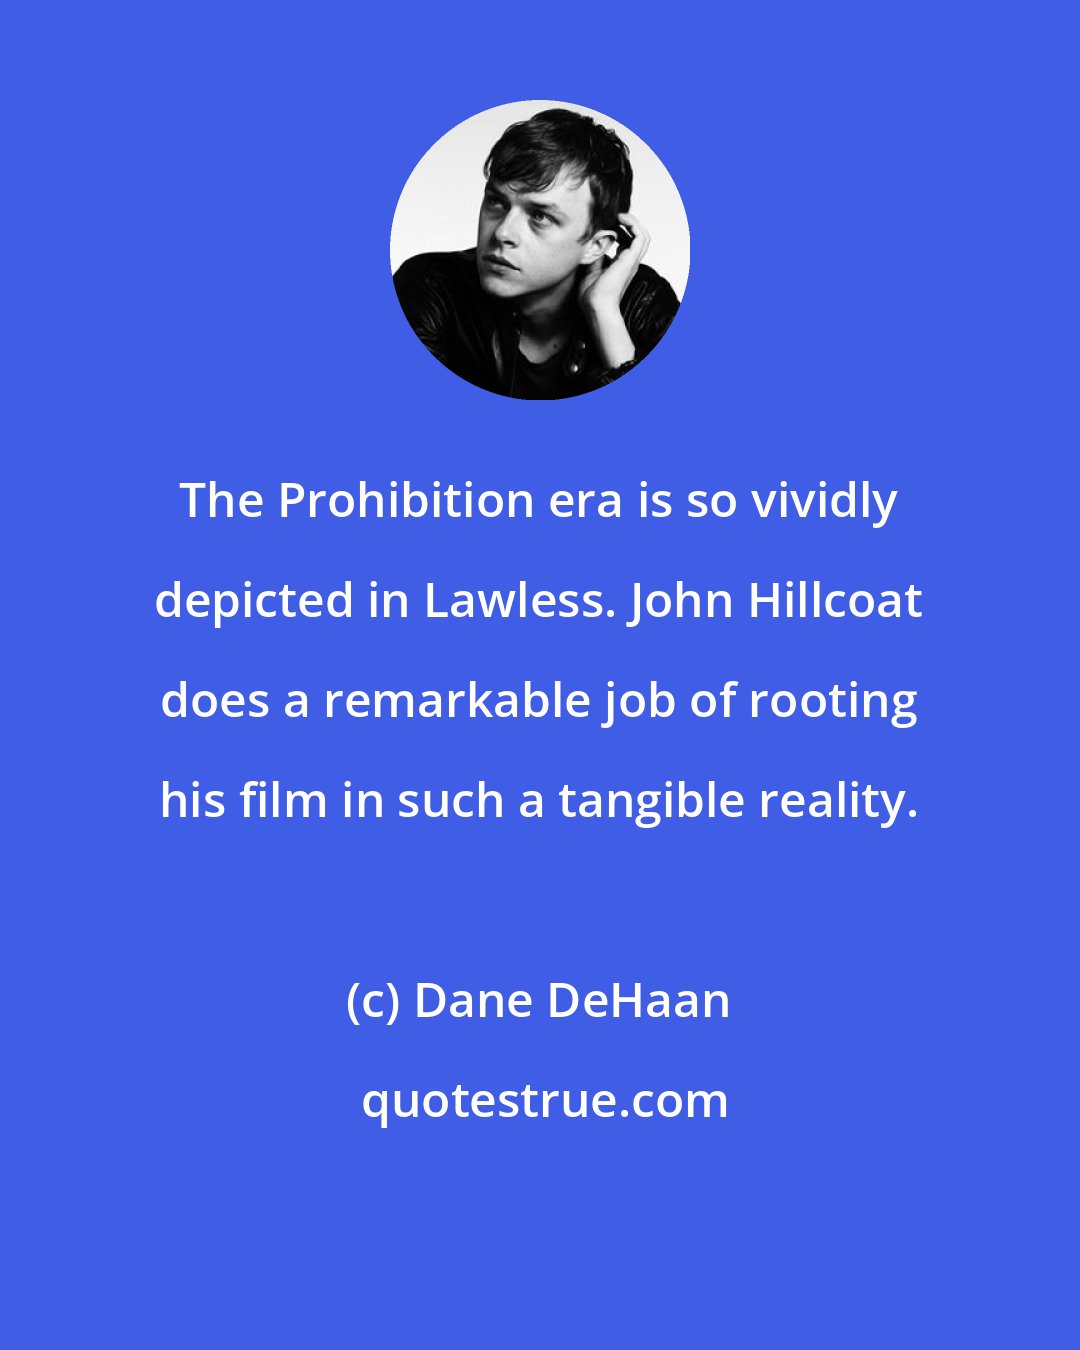 Dane DeHaan: The Prohibition era is so vividly depicted in Lawless. John Hillcoat does a remarkable job of rooting his film in such a tangible reality.